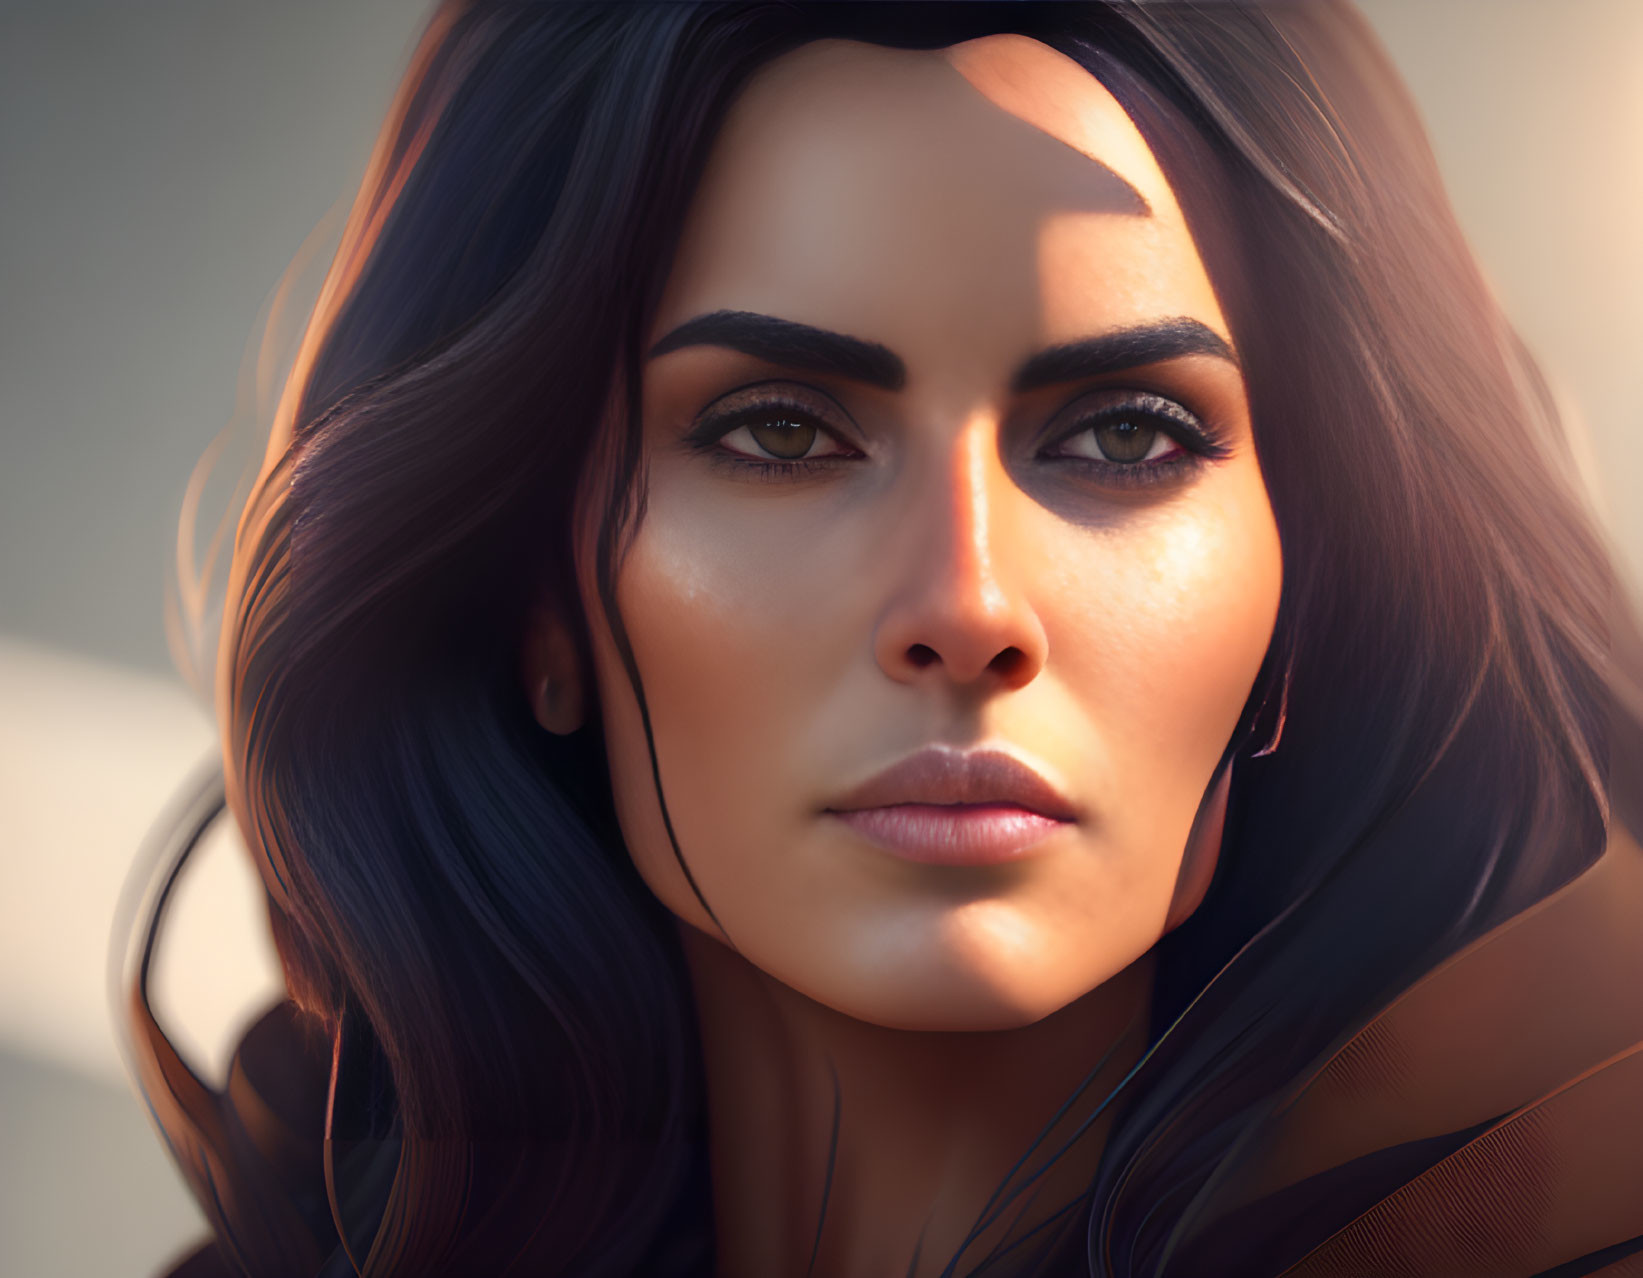 Detailed digital illustration of woman with dark hair and intense brown eyes.